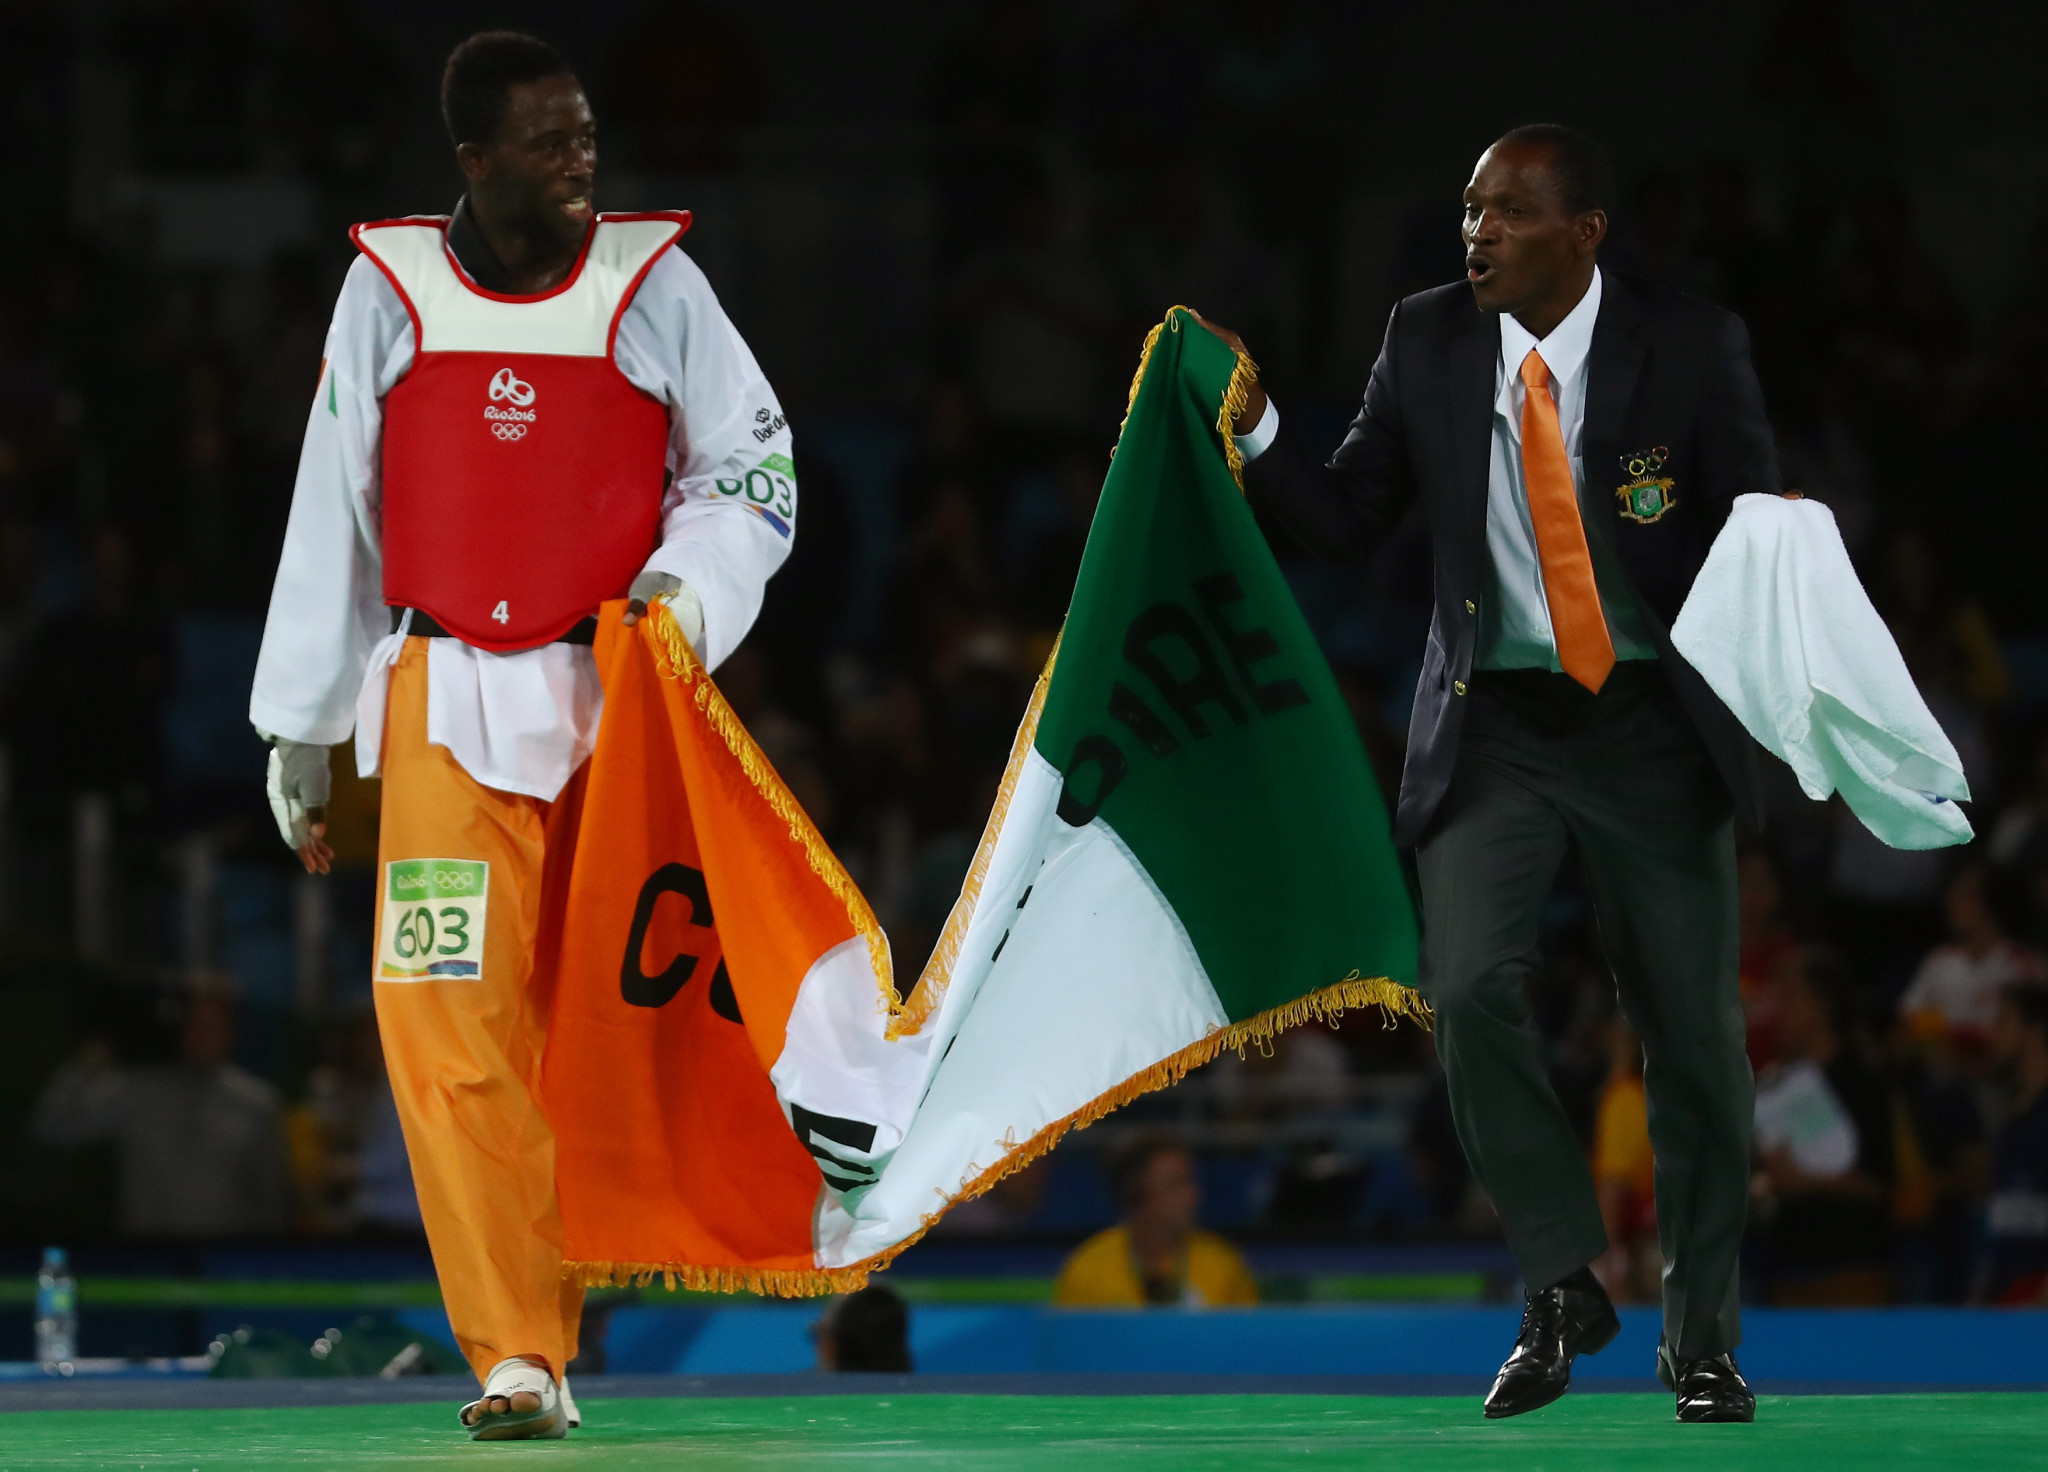 Cheick Sallah Cissé is at the forefront of an Ivorian taekwondo boom ©Getty Images